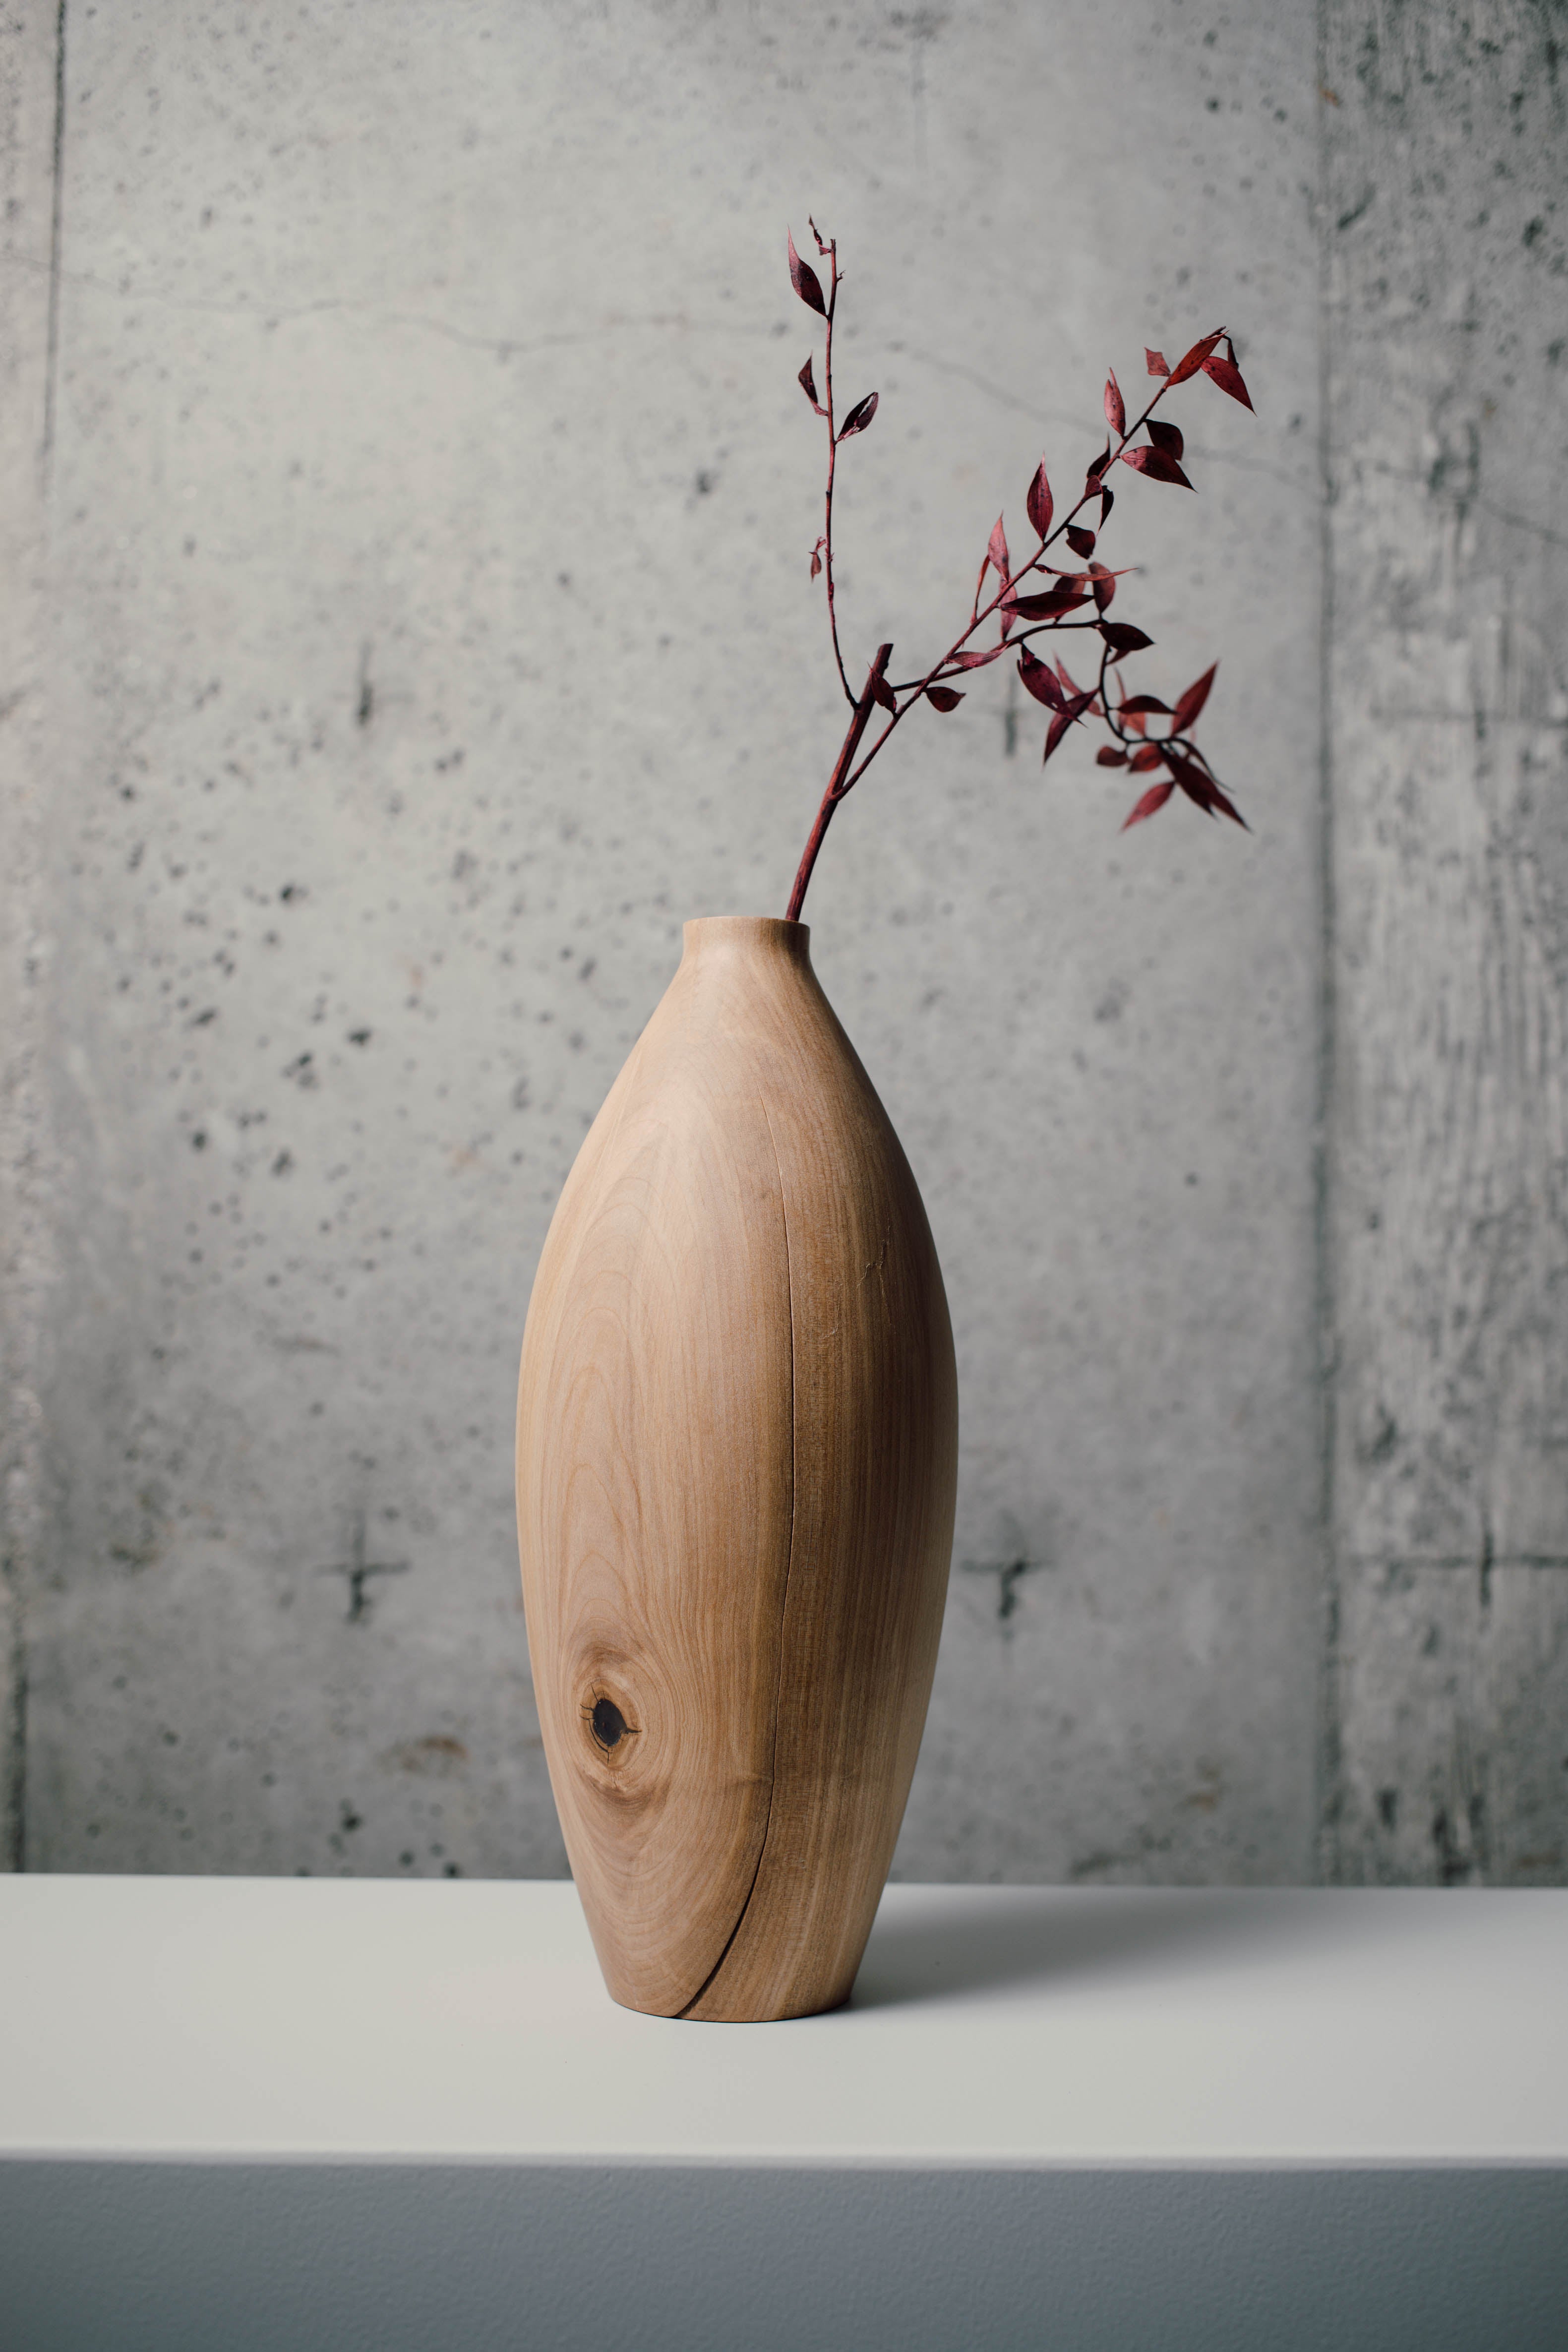 Smooth wooden vase with flowers against a concrete wall